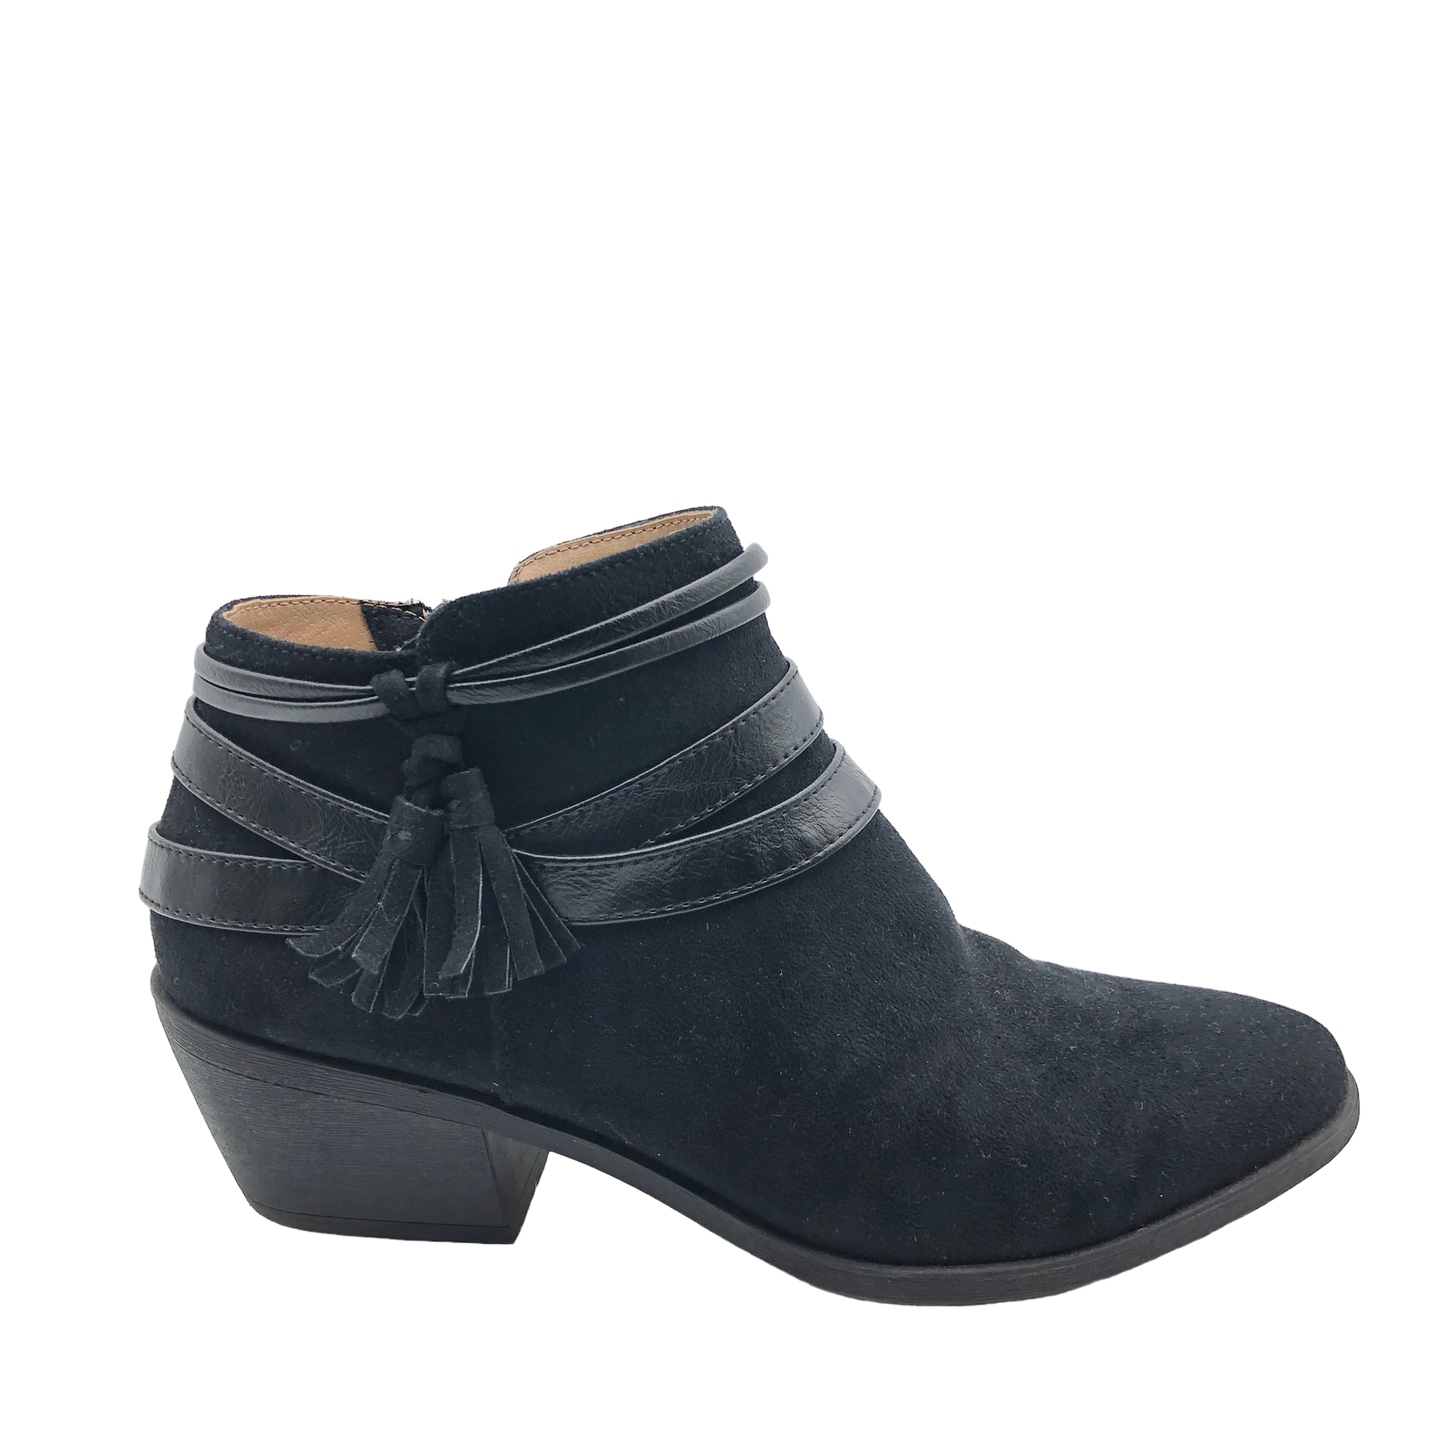 Boots Ankle Heels By Life Stride  Size: 8.5